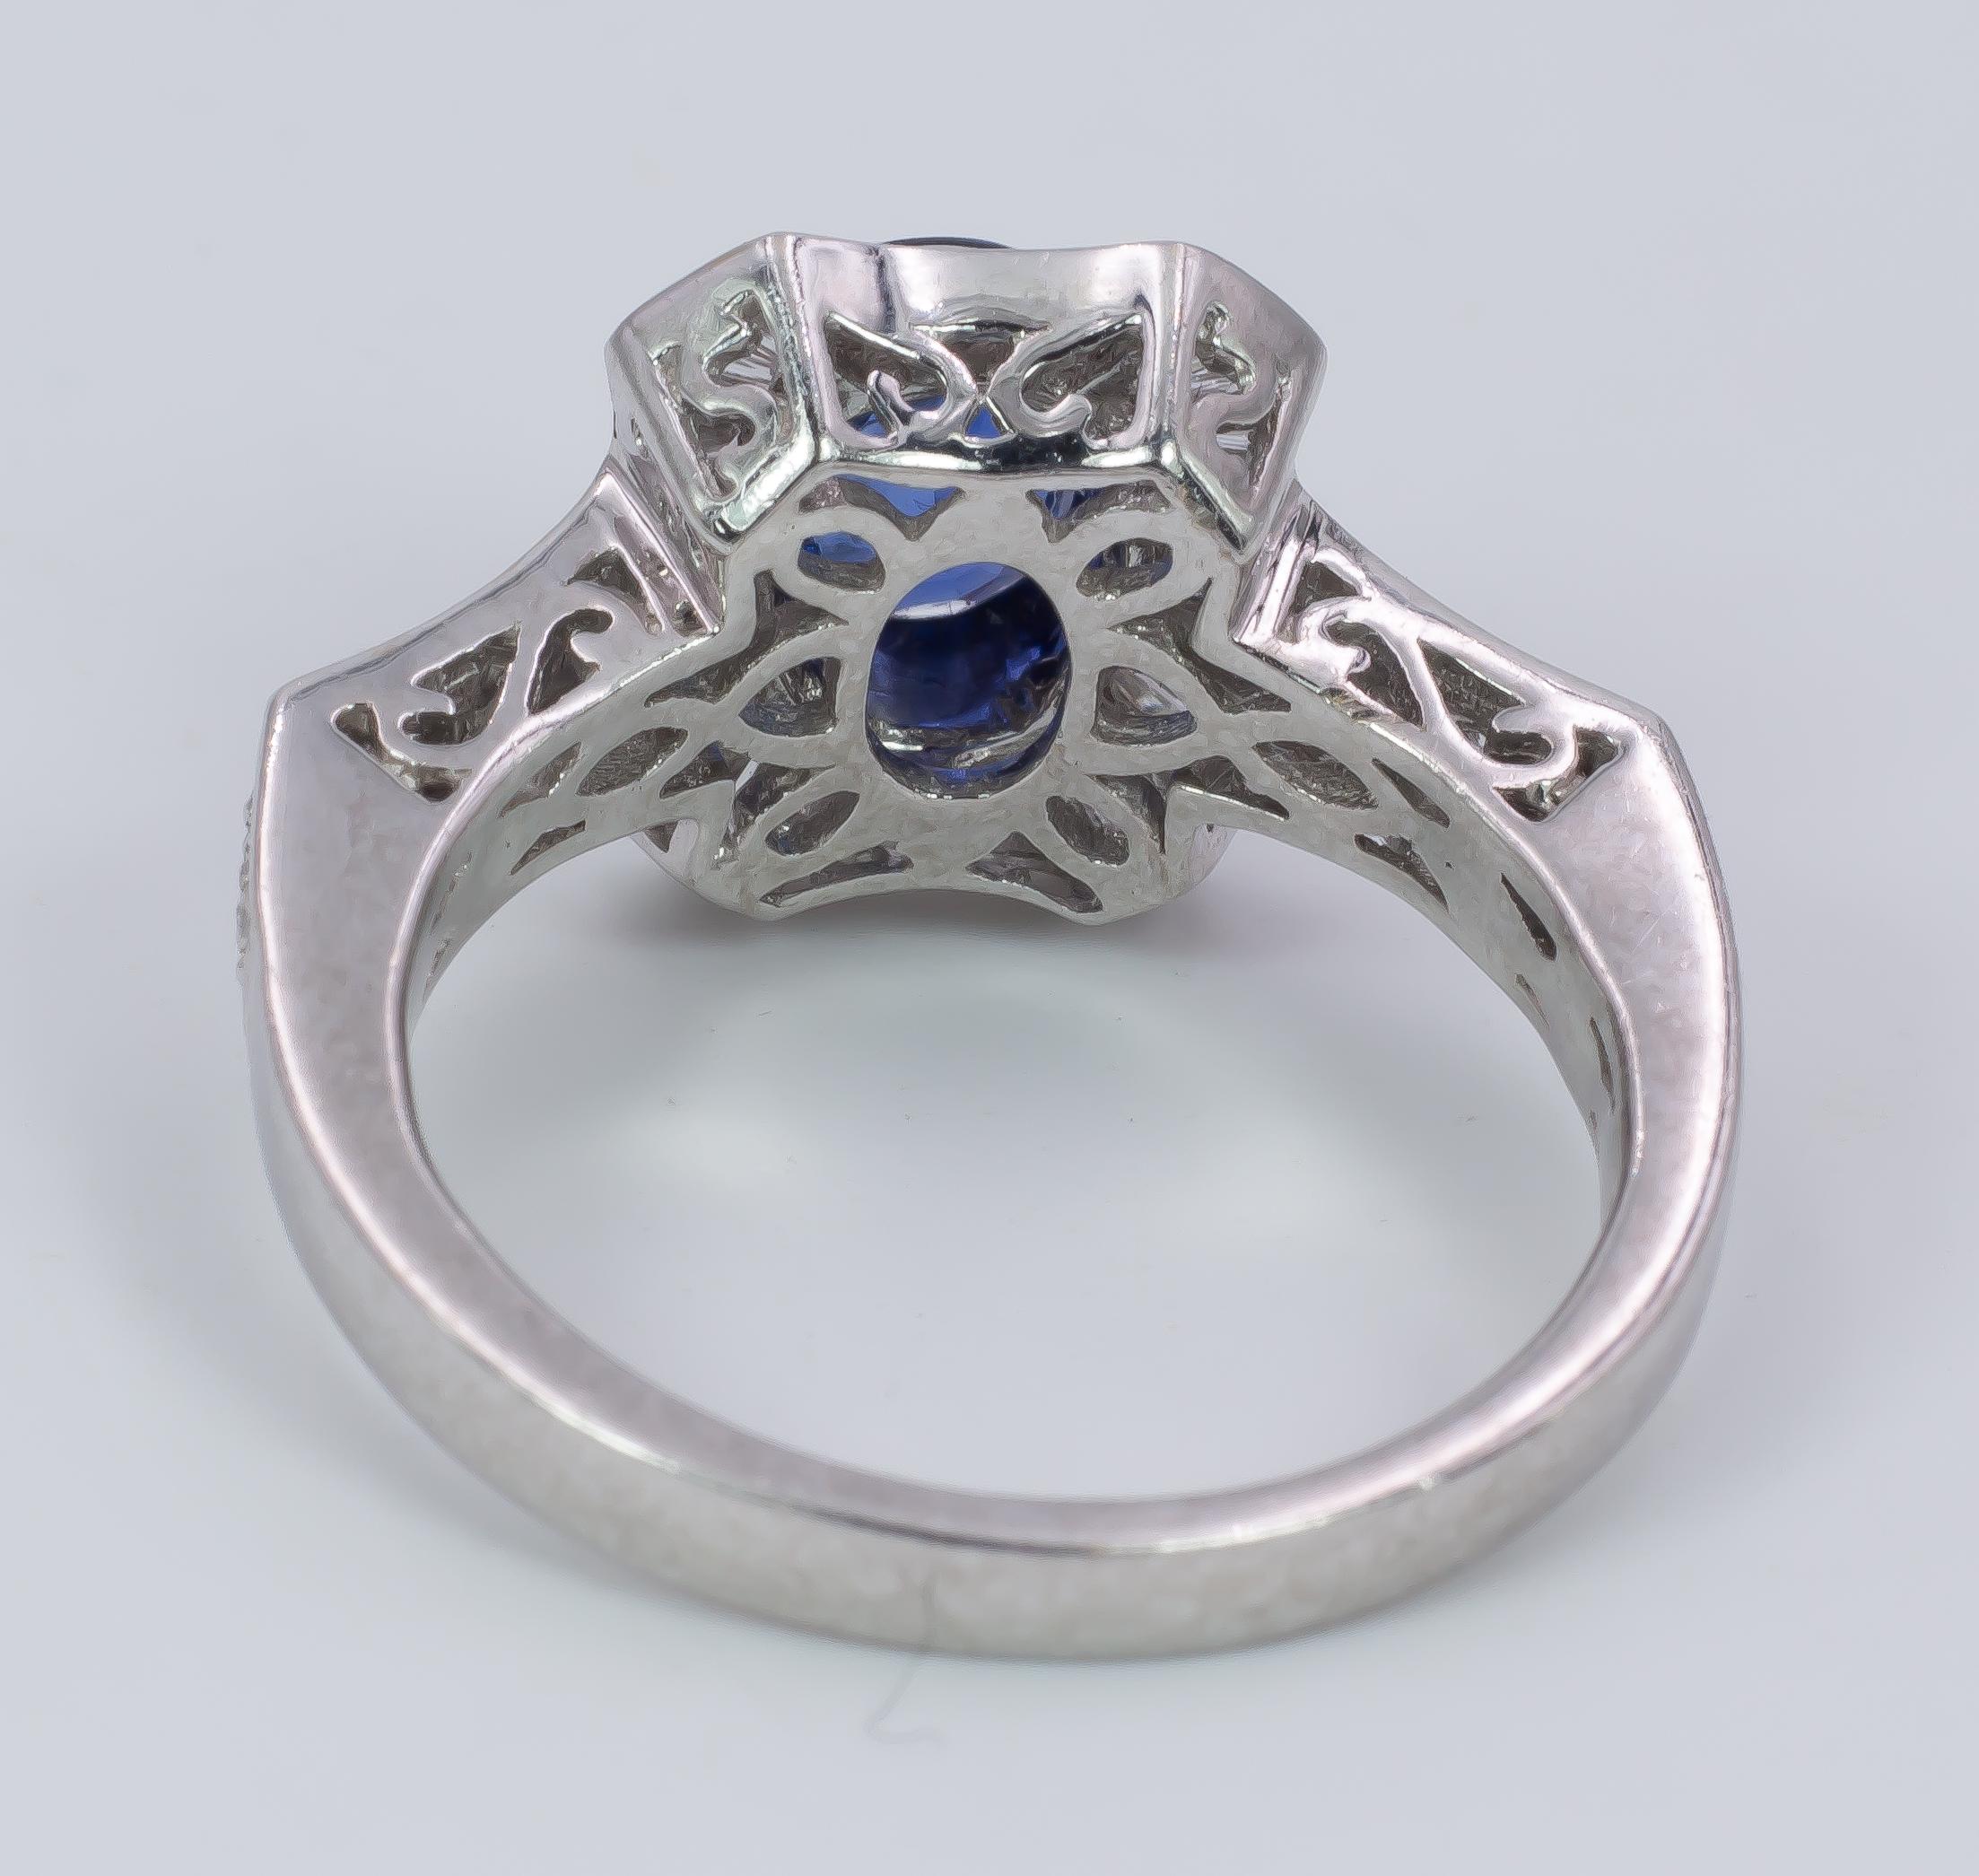 Women's Vintage 18 Karat White Gold, Sapphire and Diamond Ring, 1950s For Sale